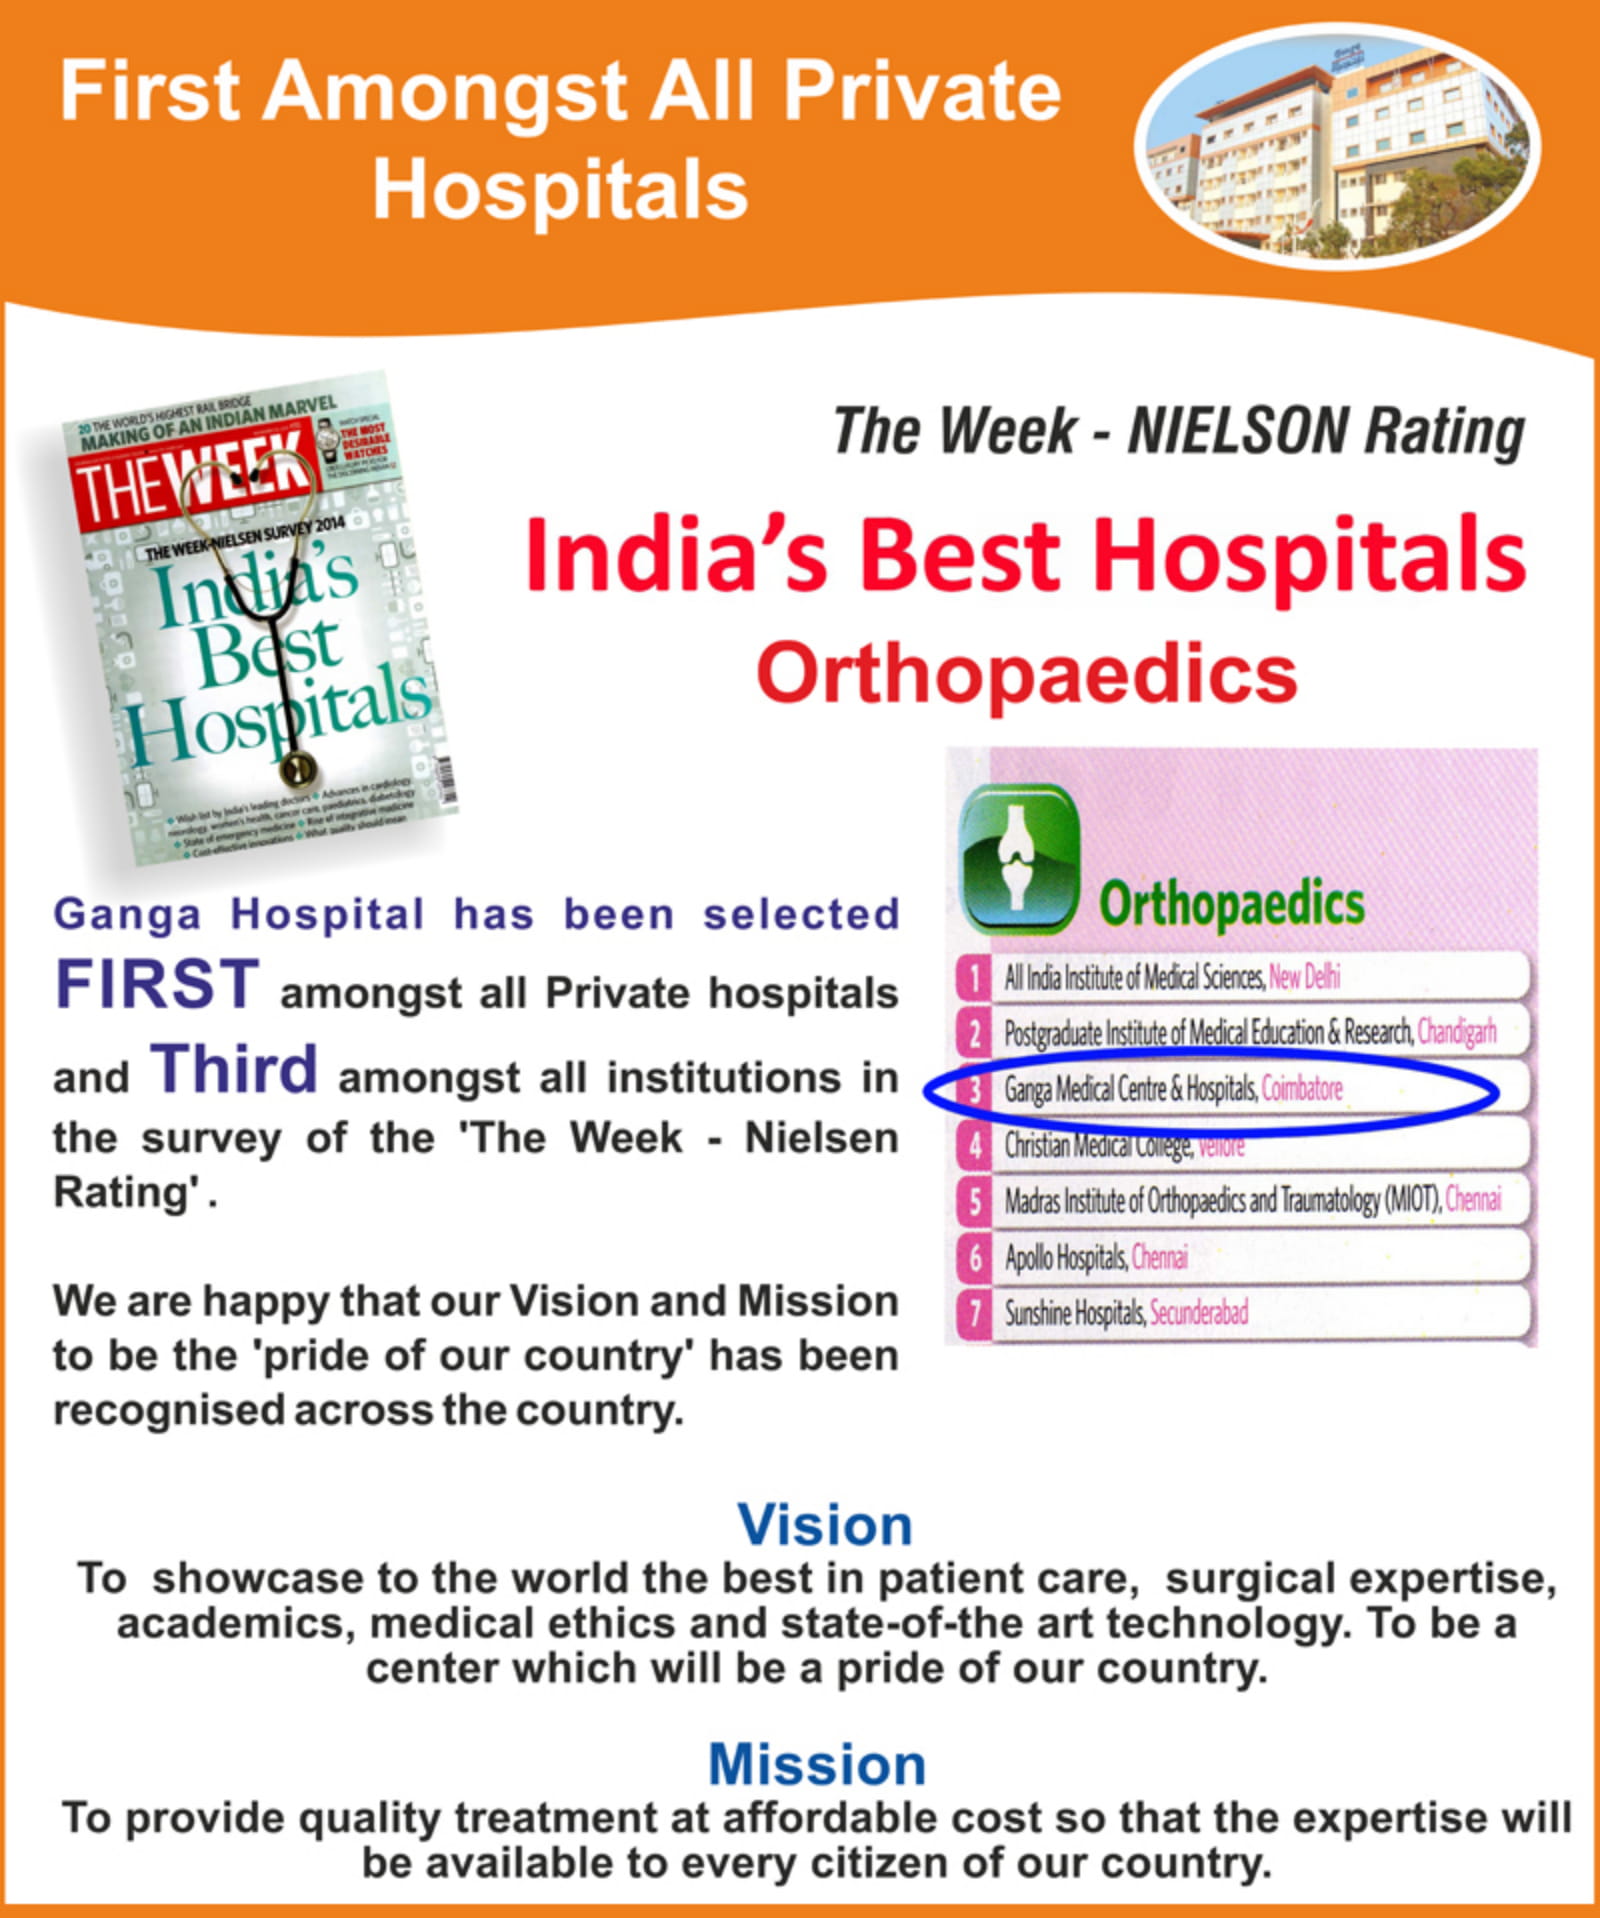 Ganga Hospital has been selected FIRST amongst all private hospitals and Third amongst all institutions in the survey of the 'The Week - Nielsen Rating'